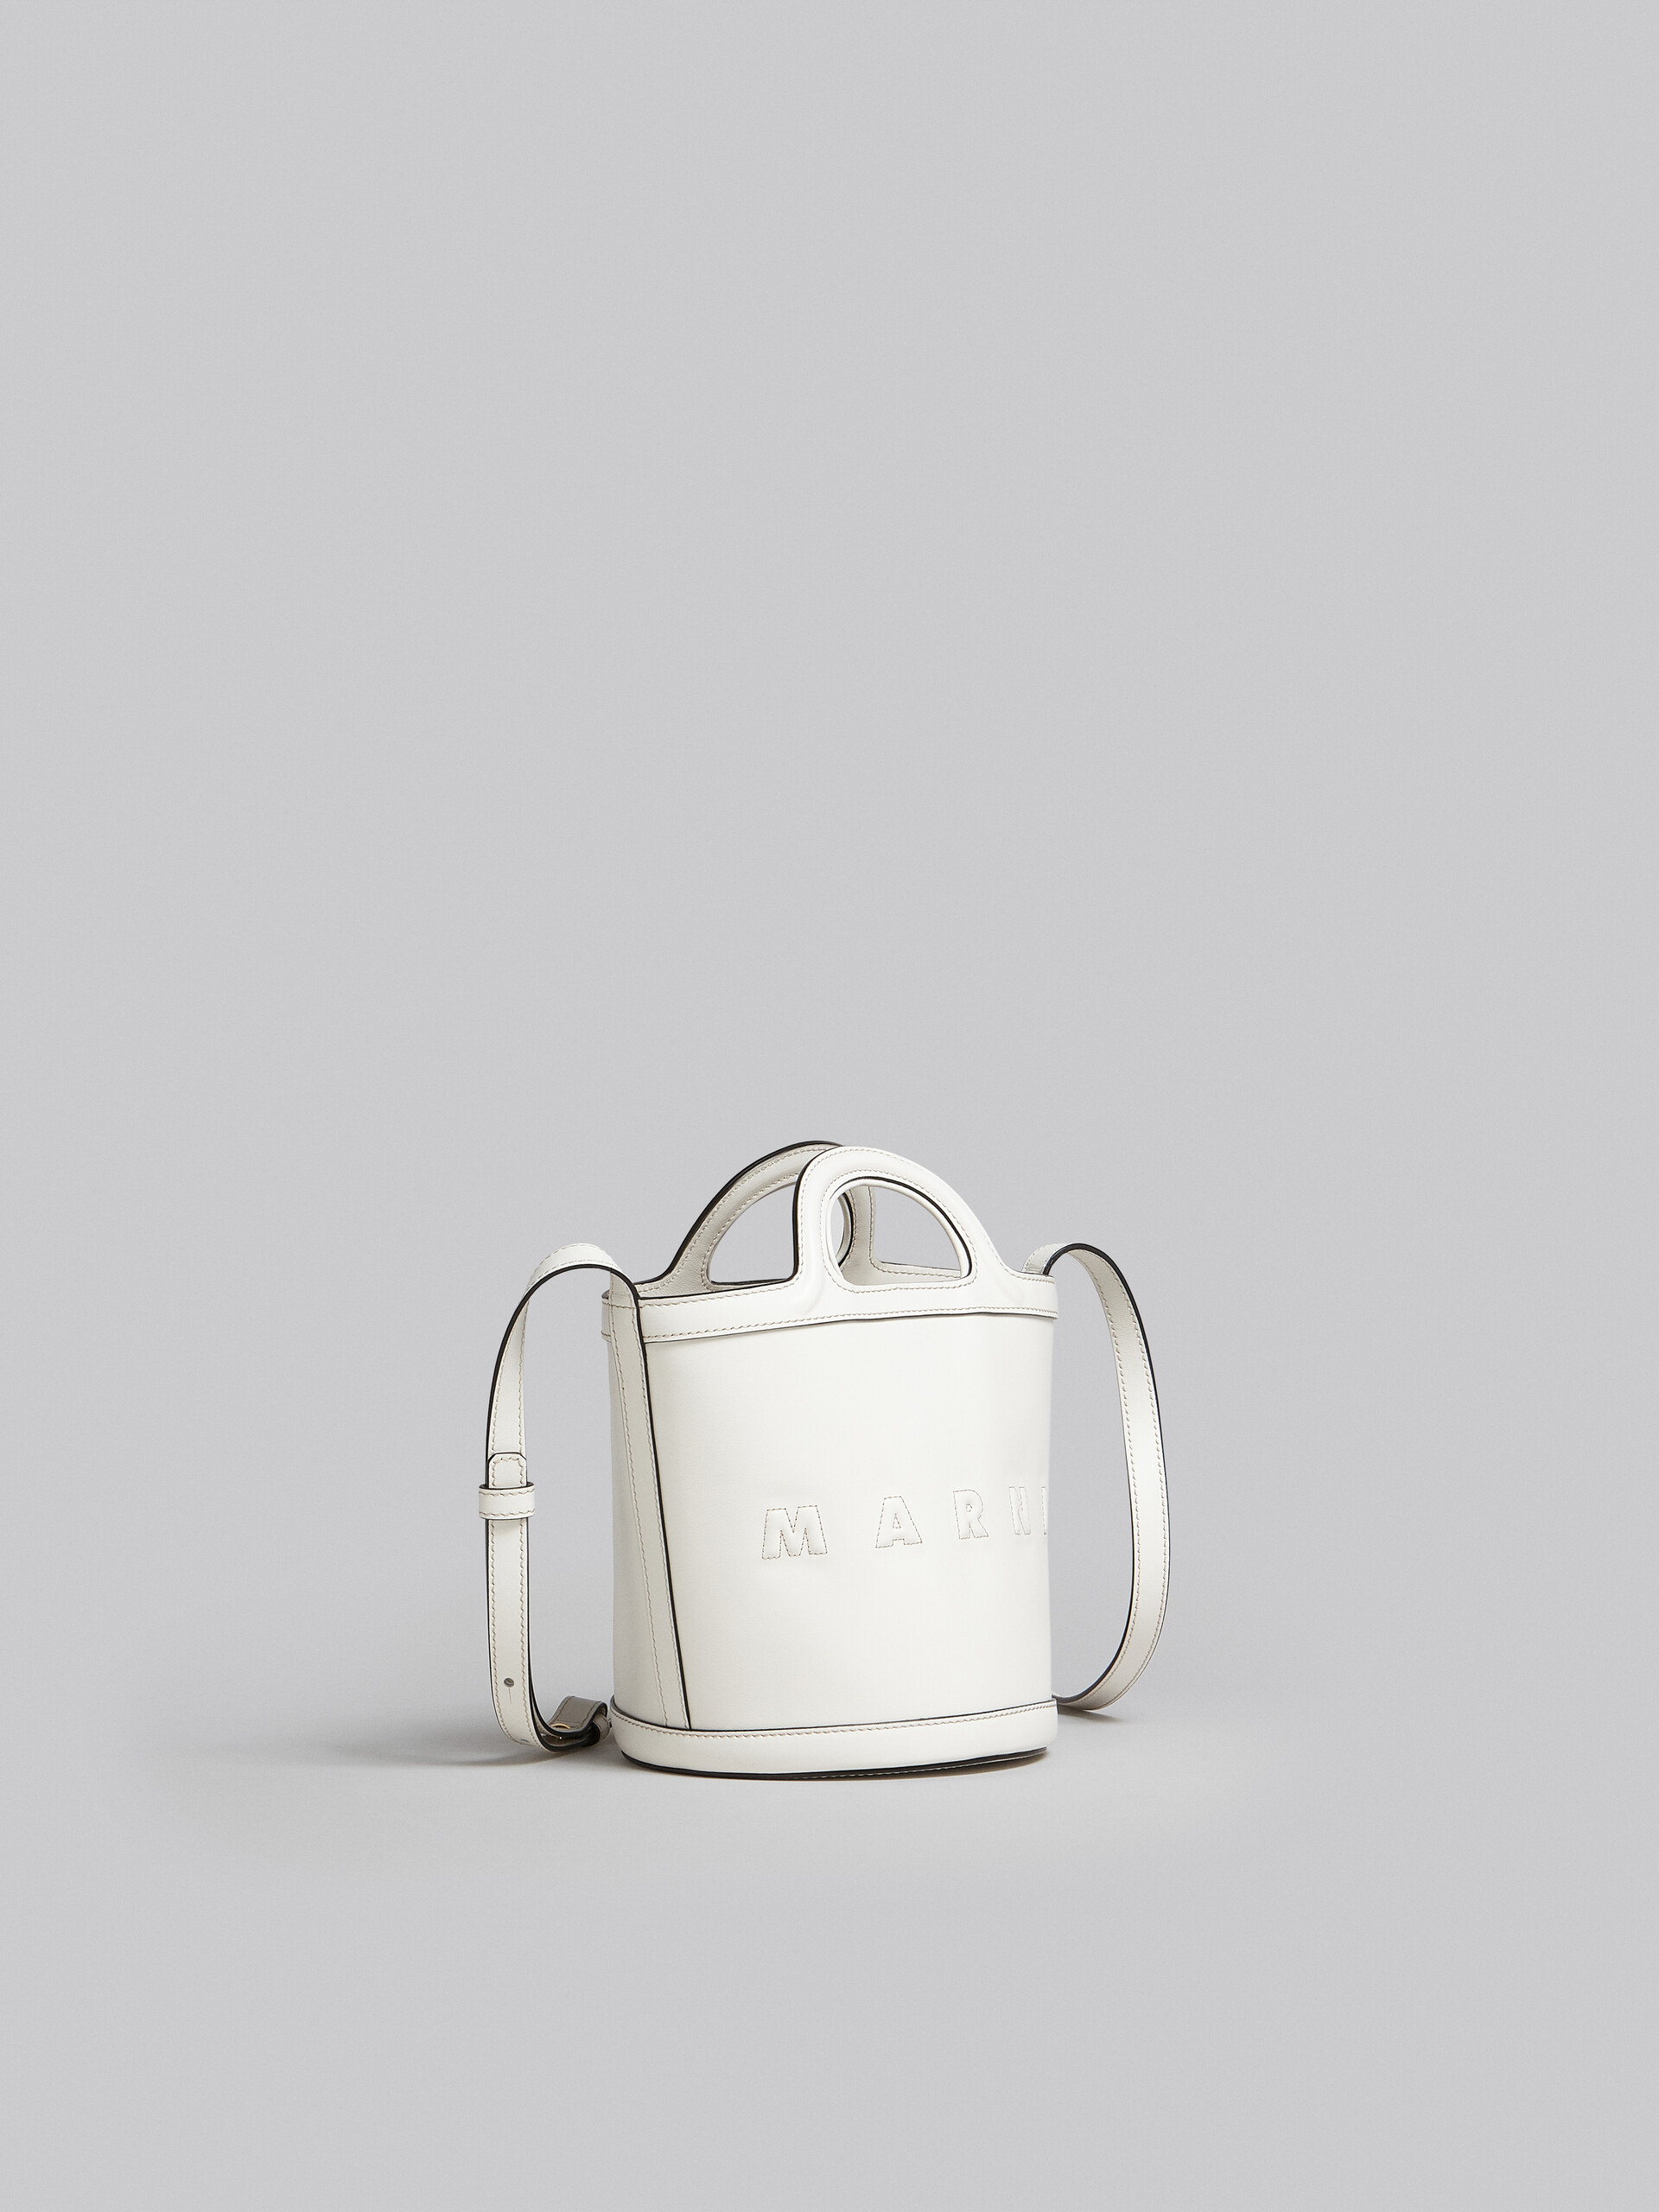 Tropicalia Small Bucket Bag in white leather - Shoulder Bag - Image 6